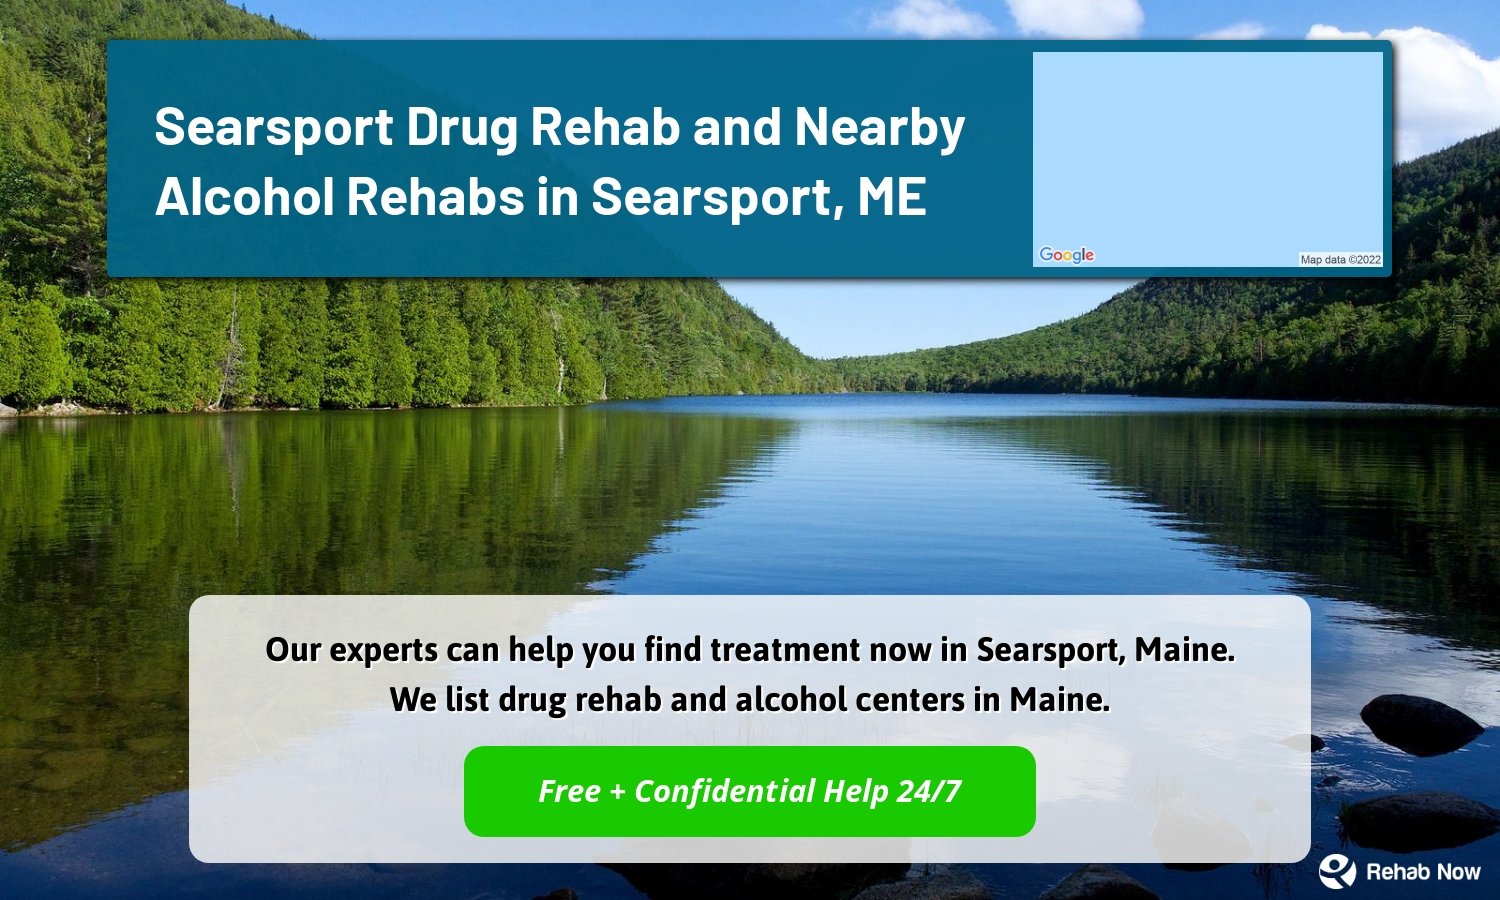 Our experts can help you find treatment now in Searsport, Maine. We list drug rehab and alcohol centers in Maine.